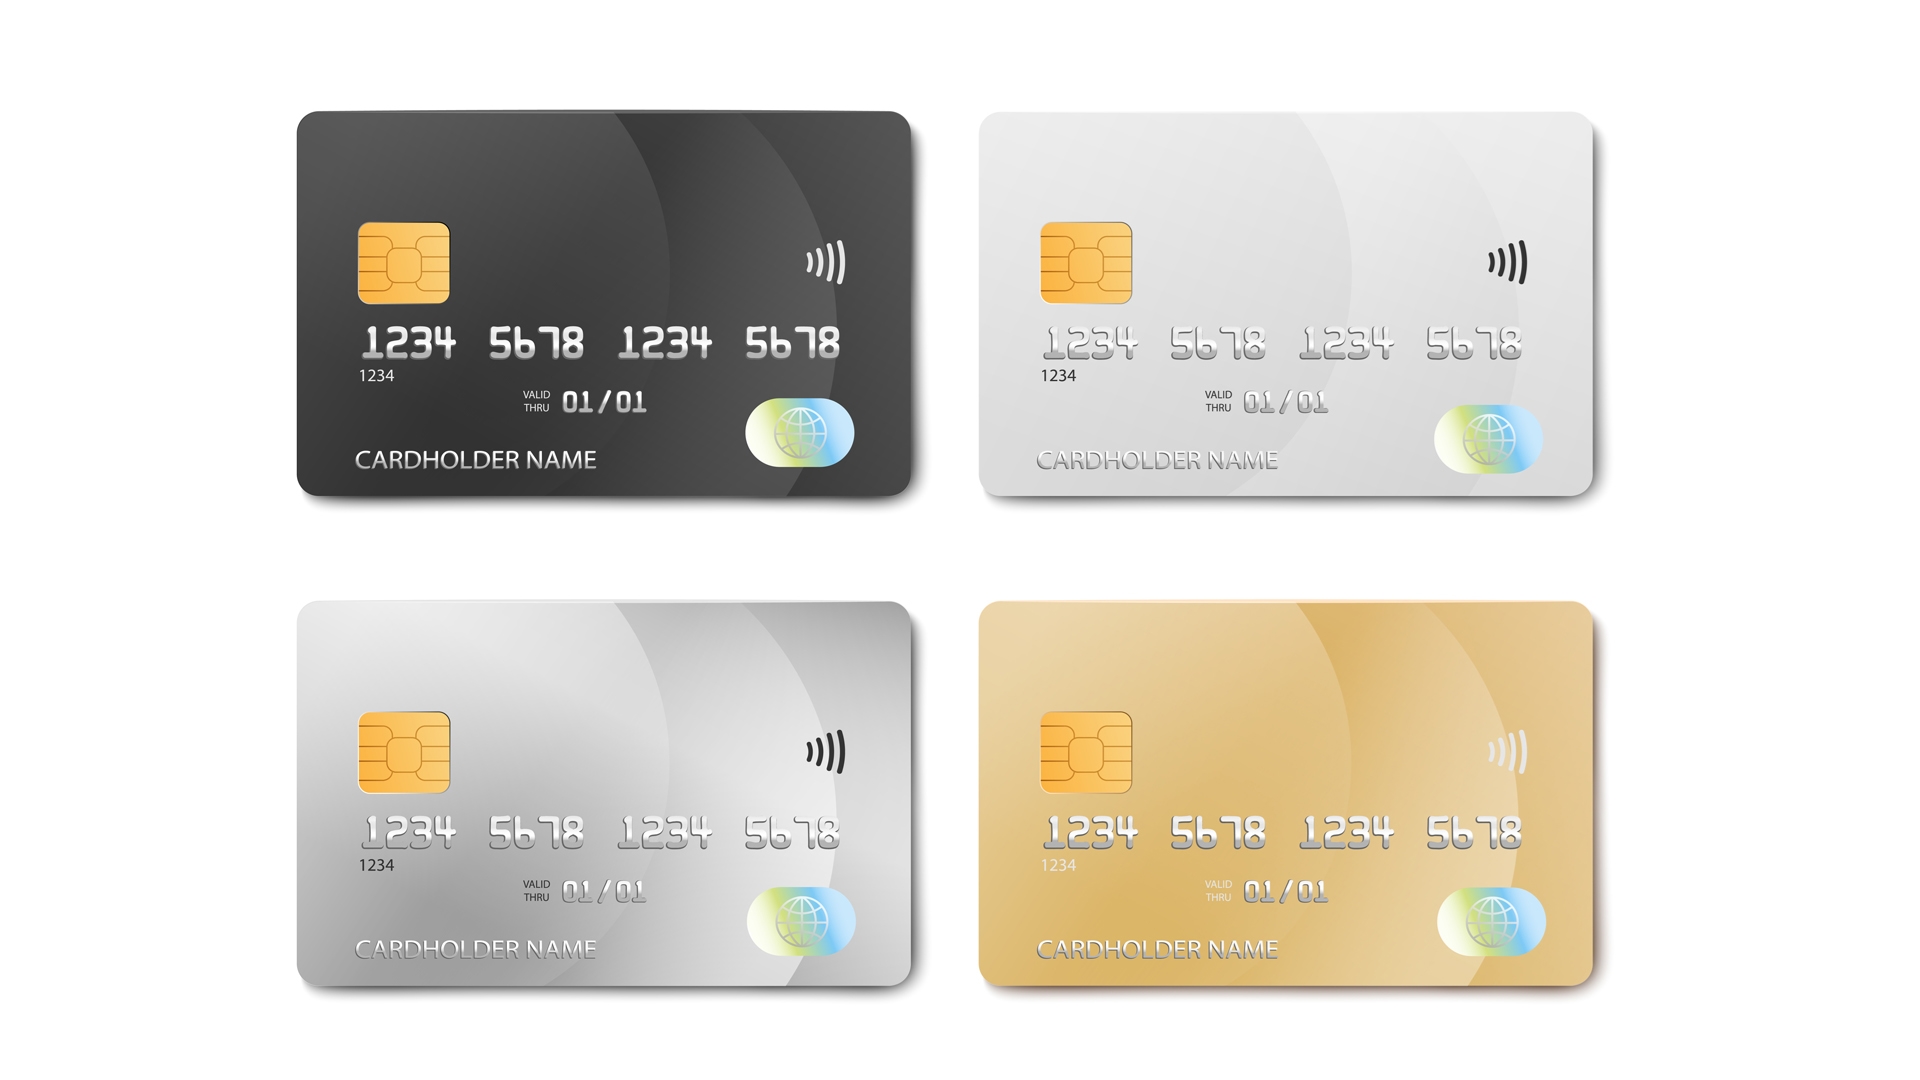 Plastic bank card design template set - isolated credit or debit cards mock up